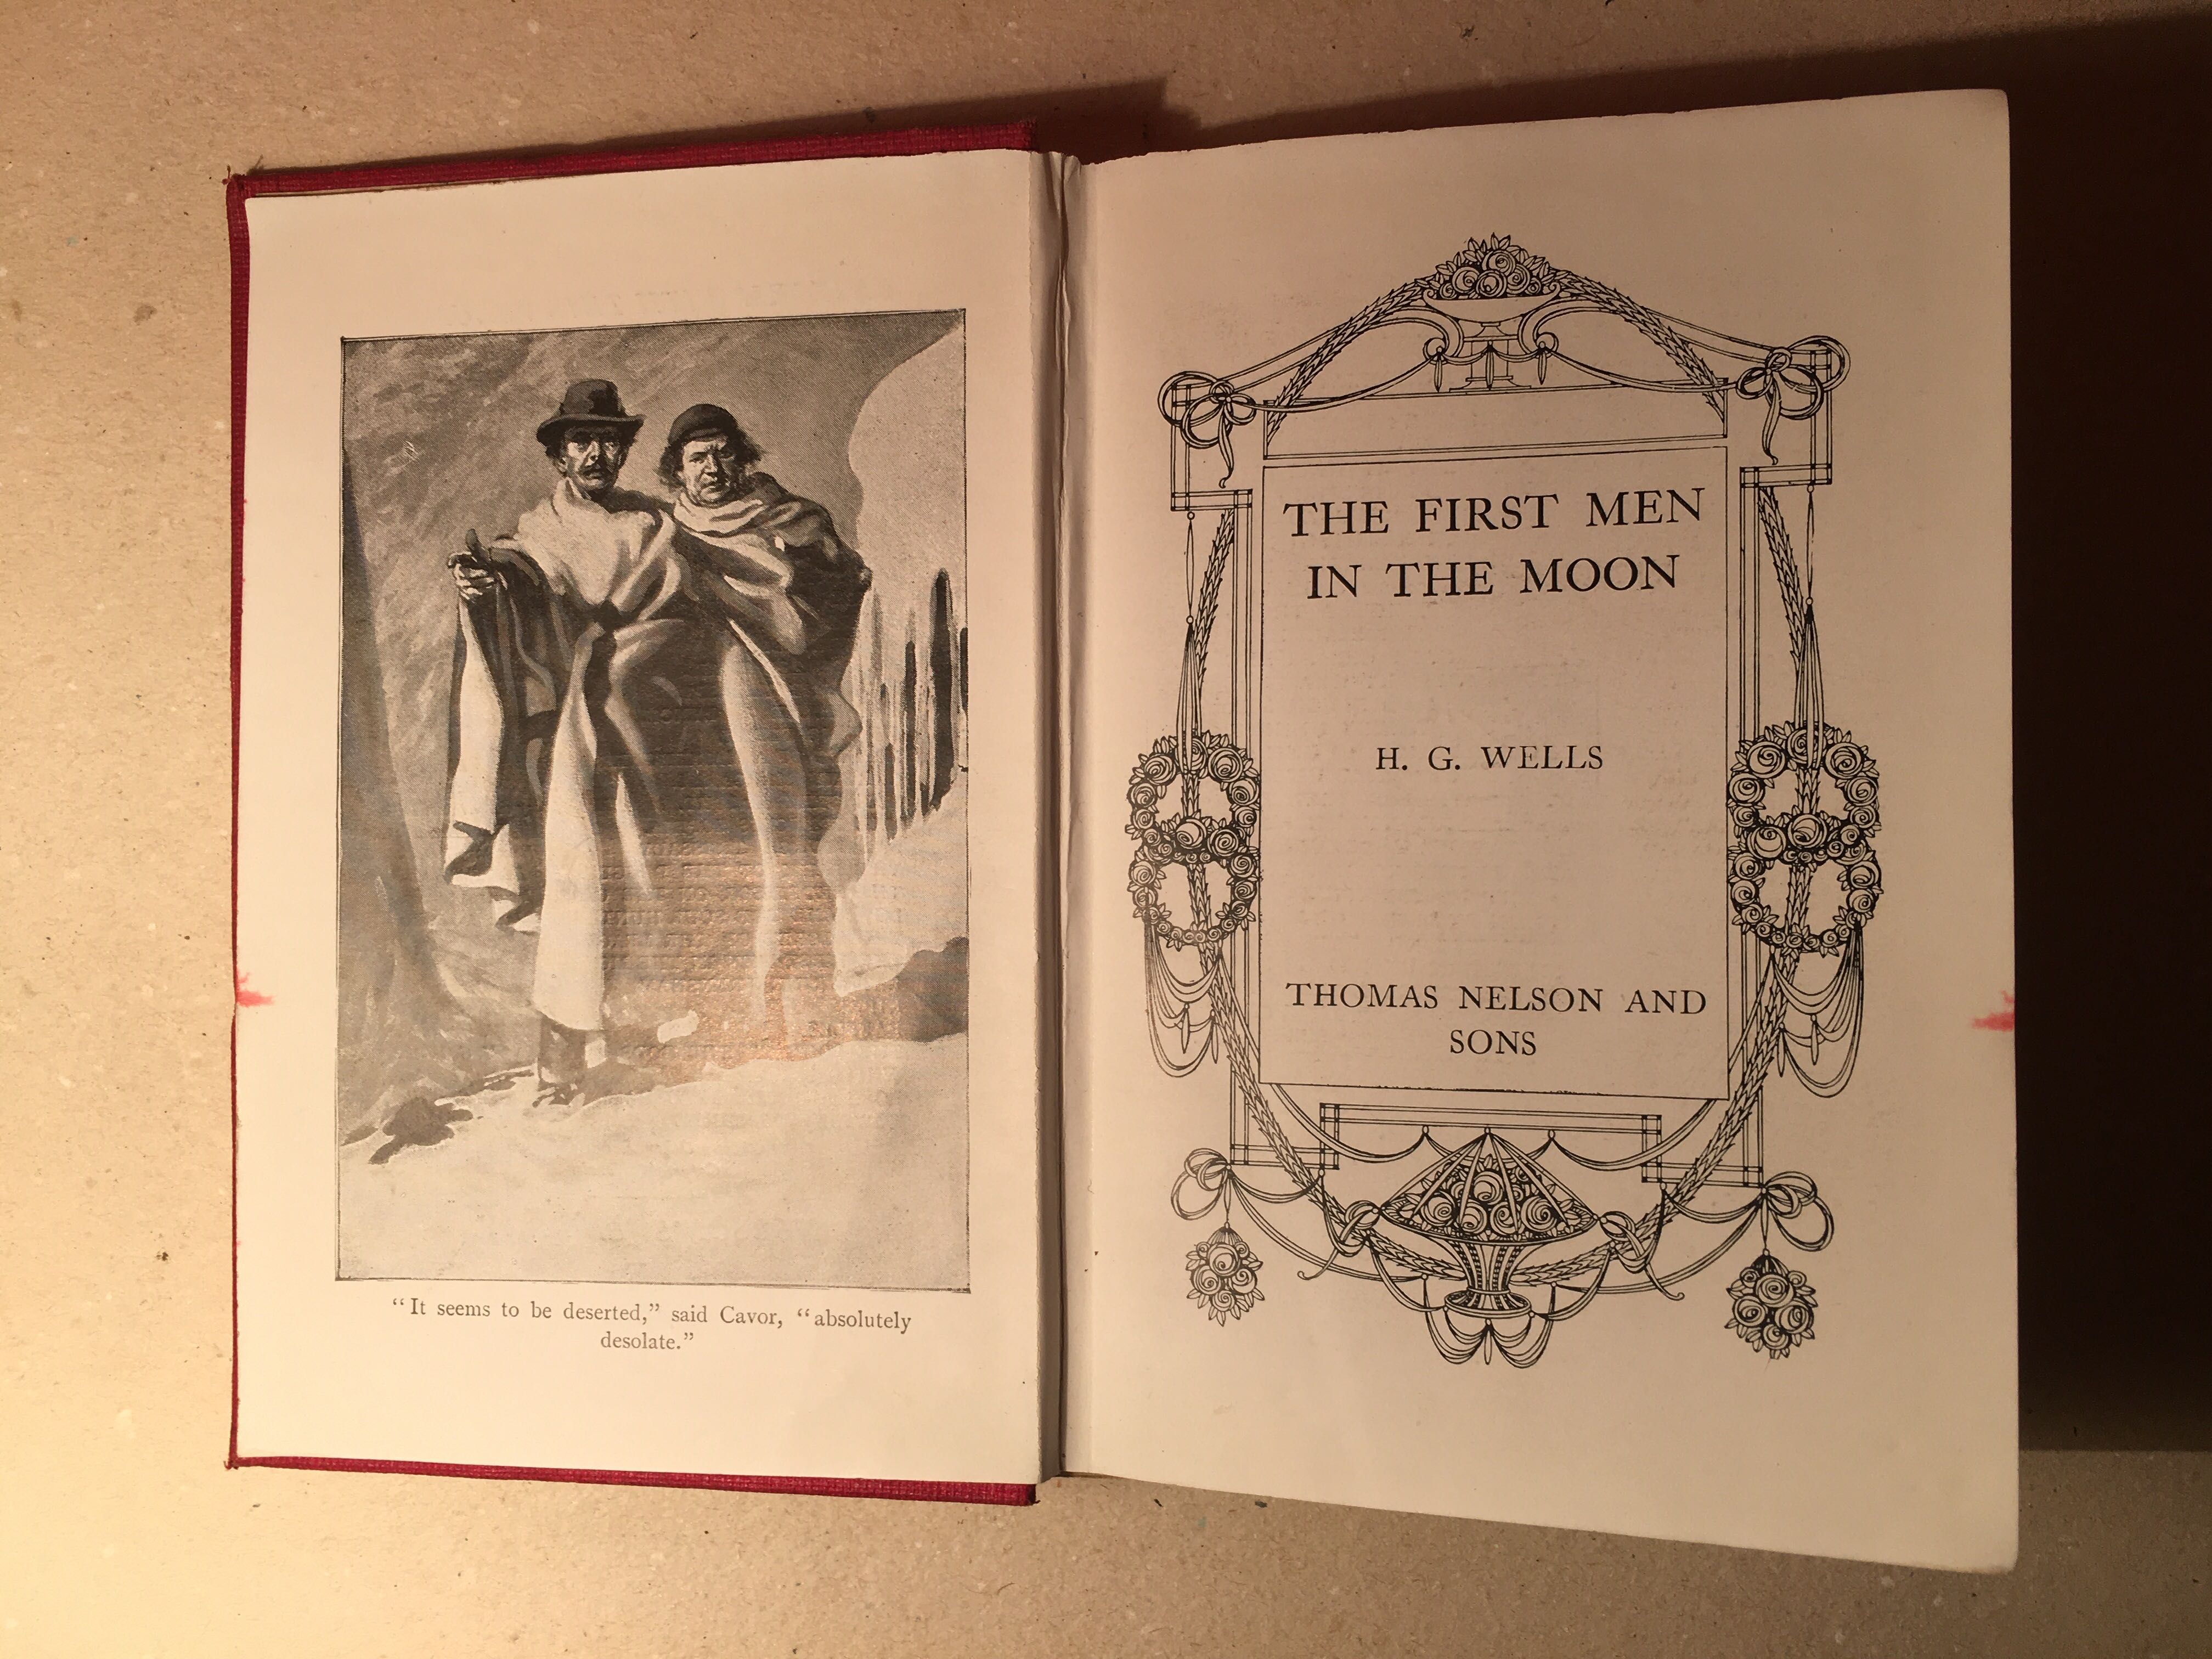 H. G. WELLS - The First Men in The Moon - atribuído a 1907